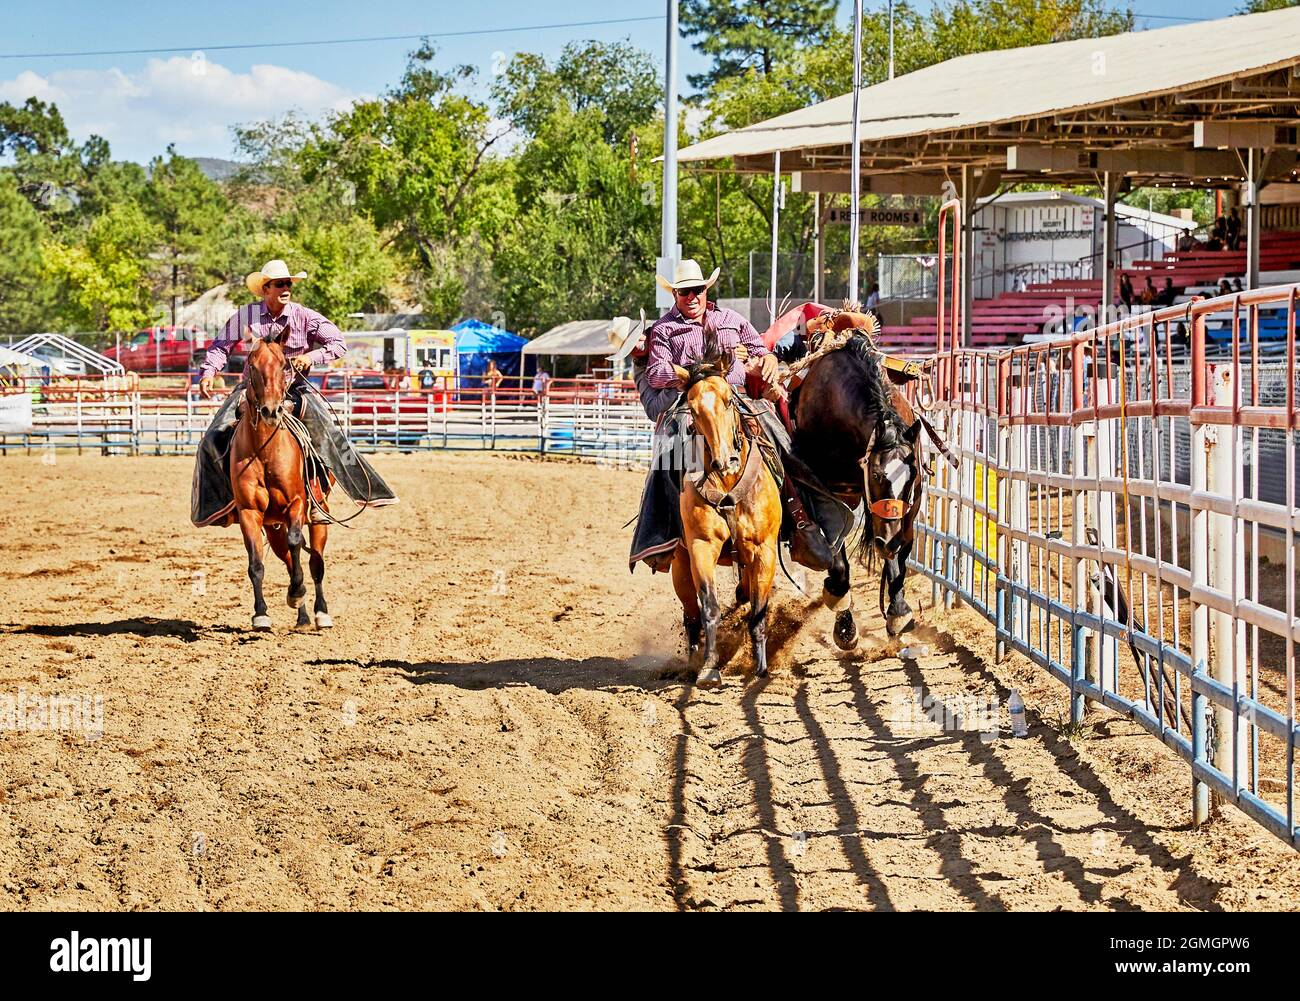 Prescott, Arizona, USA - September 12, 2021: Cowboy jumping off a bucking horse onto the handler's horse at the rodeo competition held at the Prescott Stock Photo